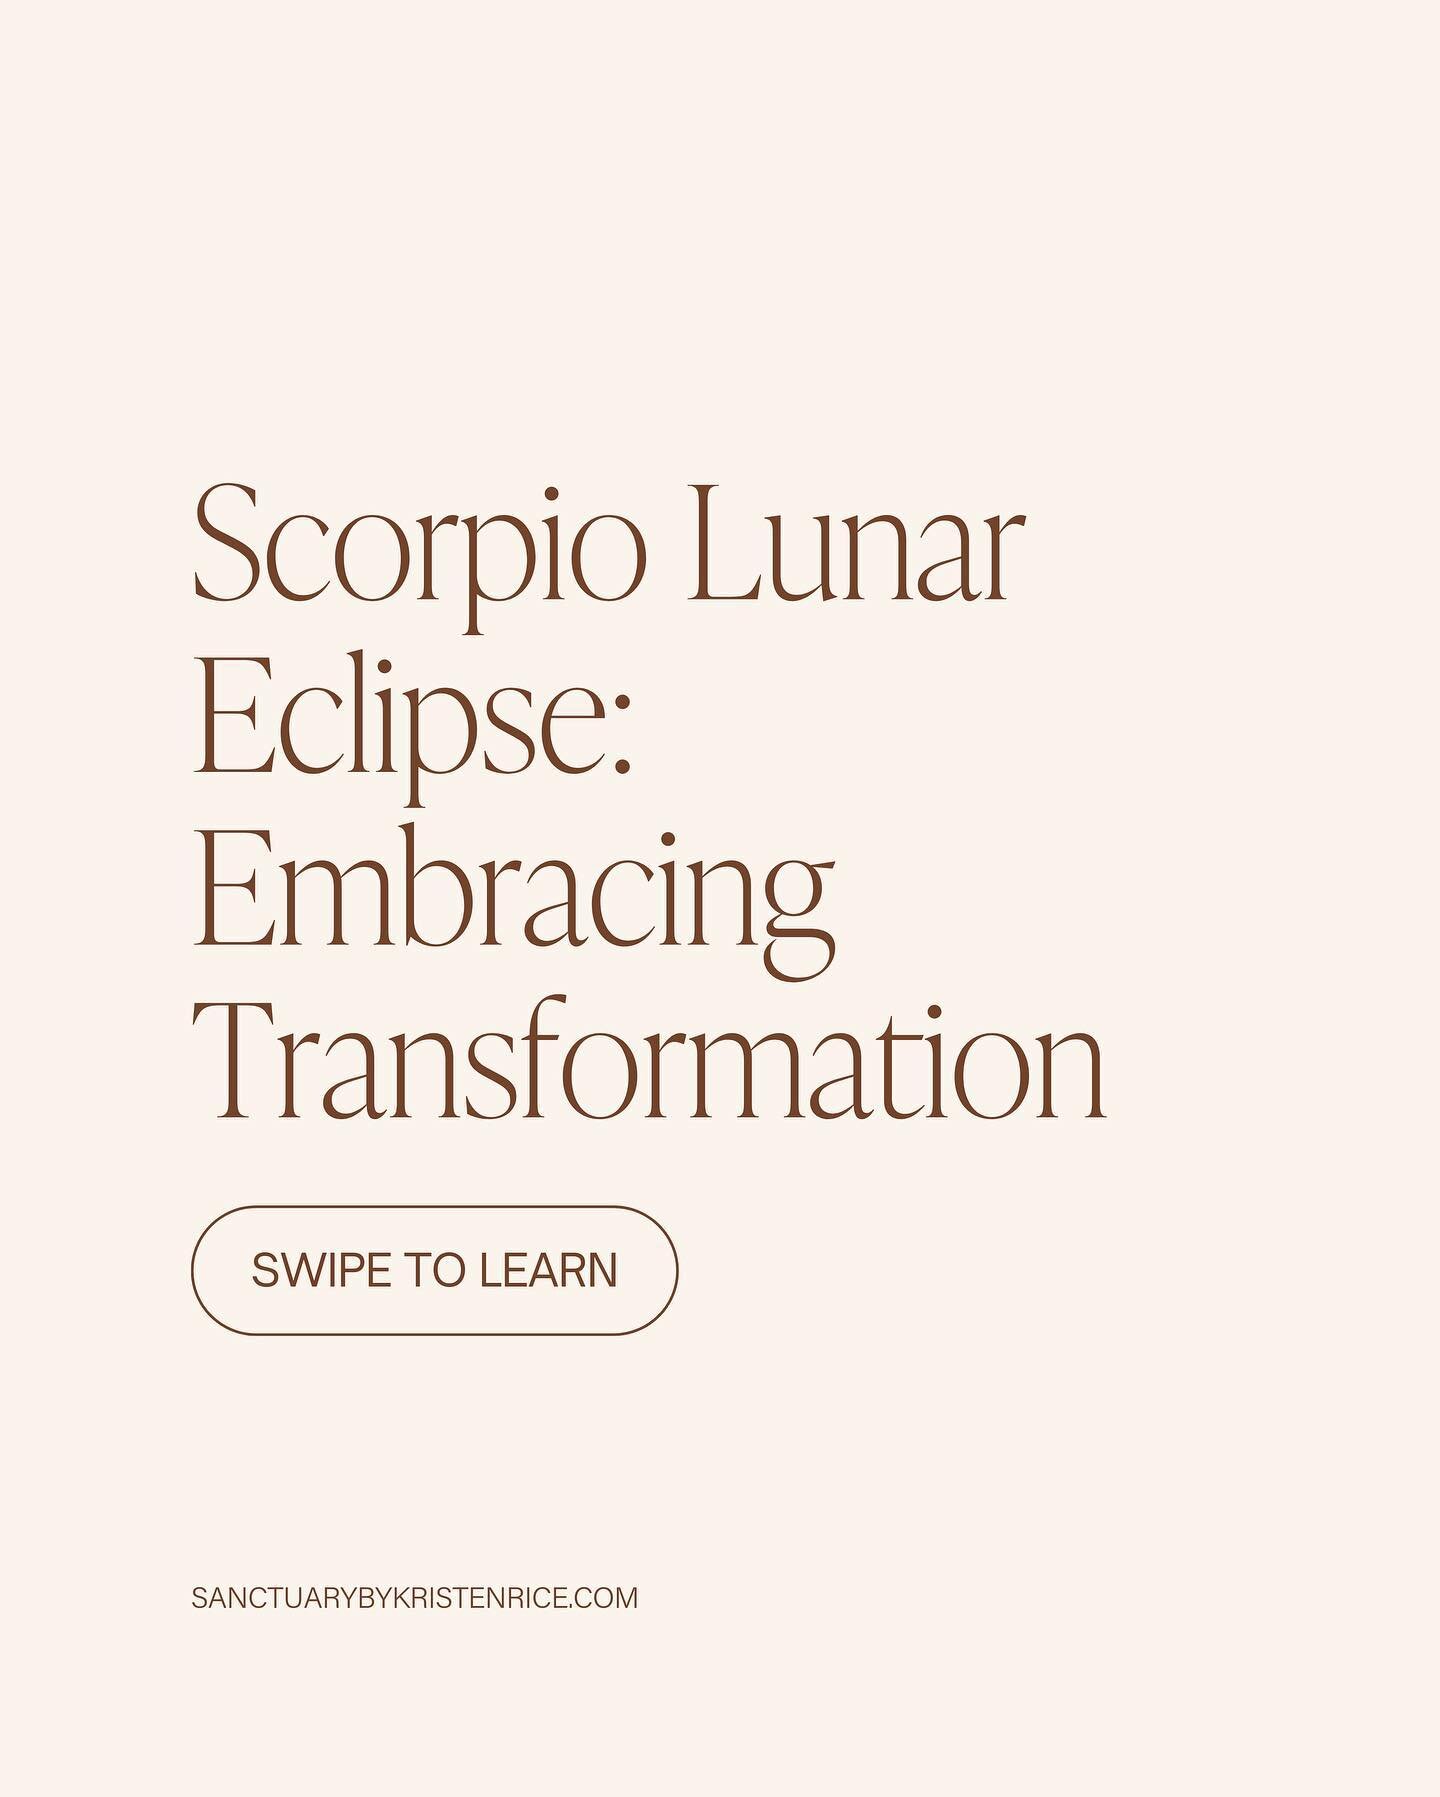 Scorpio is a sign intimately connected with the concept of death and rebirth.

The Scorpio Lunar Eclipse invites us to embrace the end of cycles and phases in our lives, recognizing that endings are a natural and necessary part of growth.

This accep